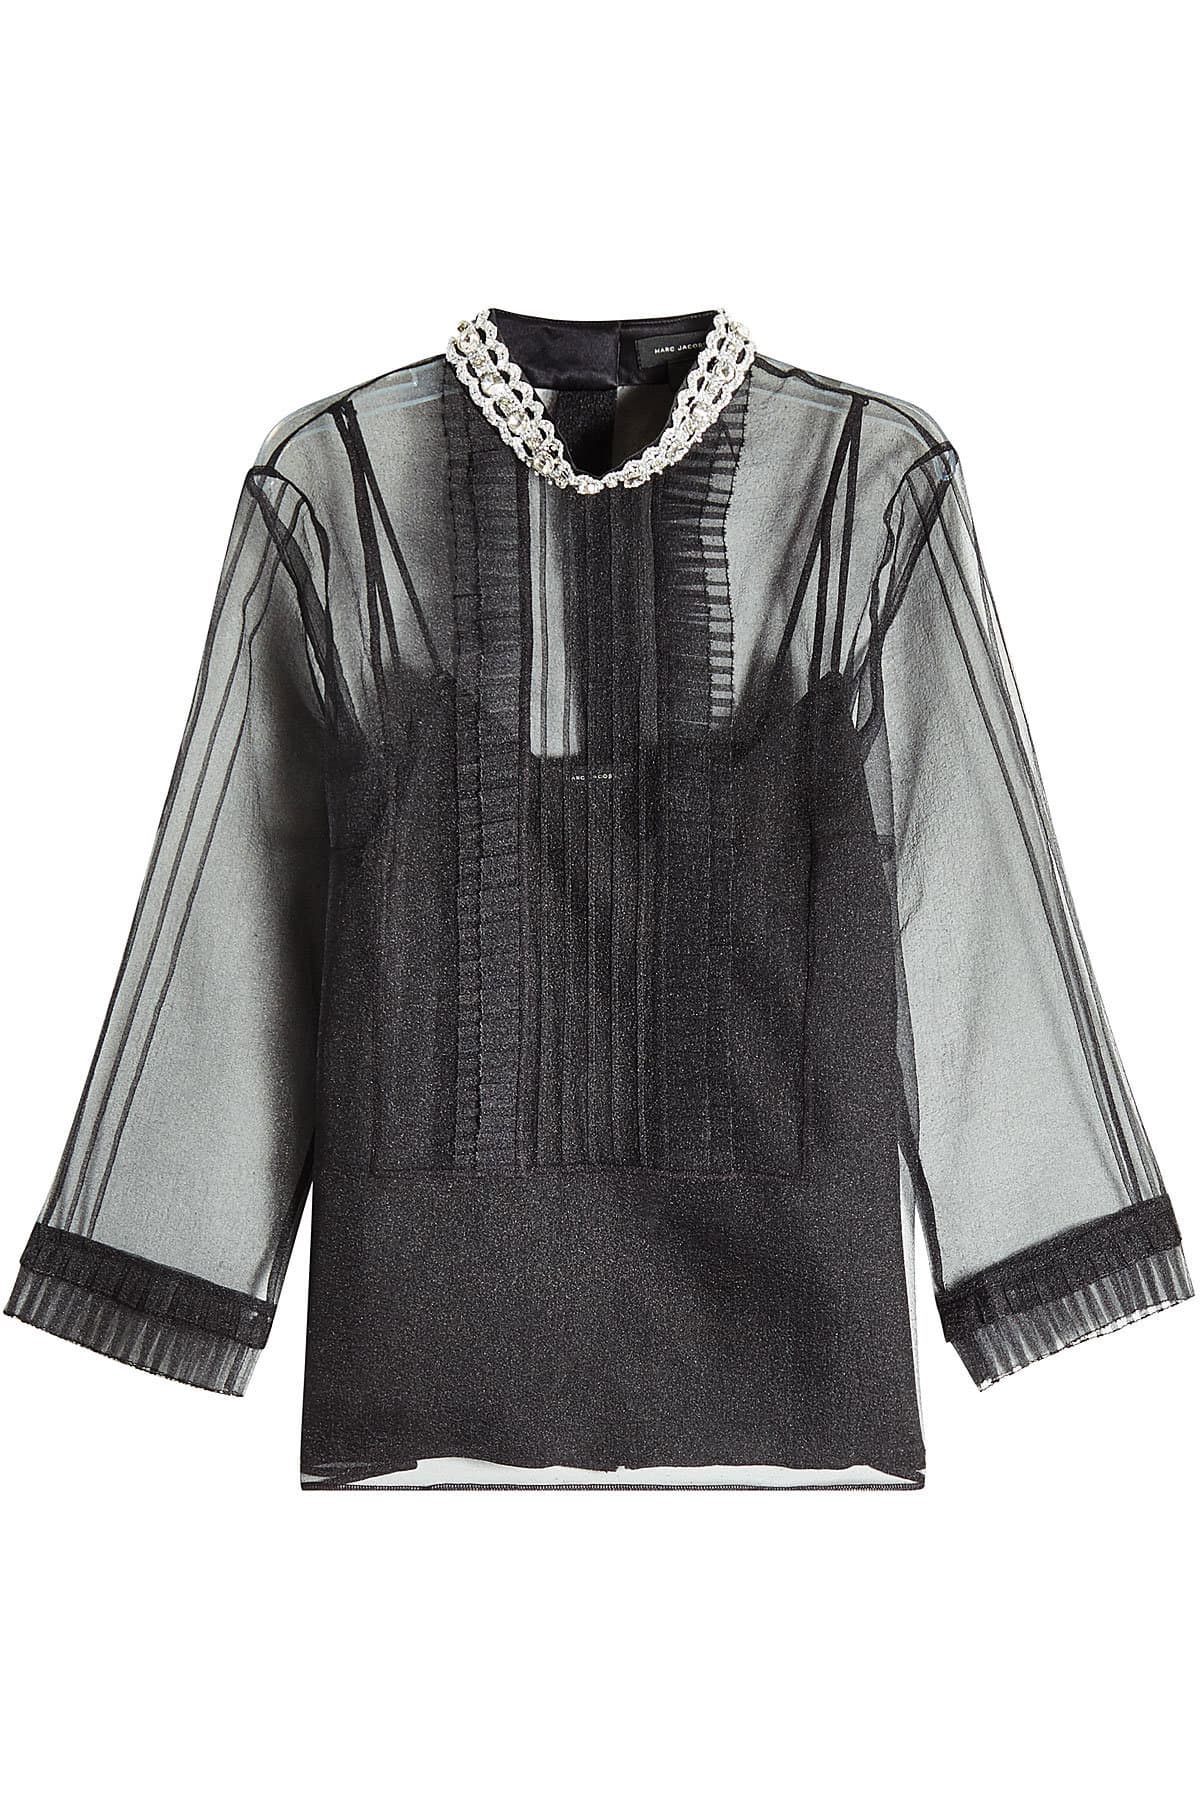 Pintuck Embellished Blouse by Marc Jacobs